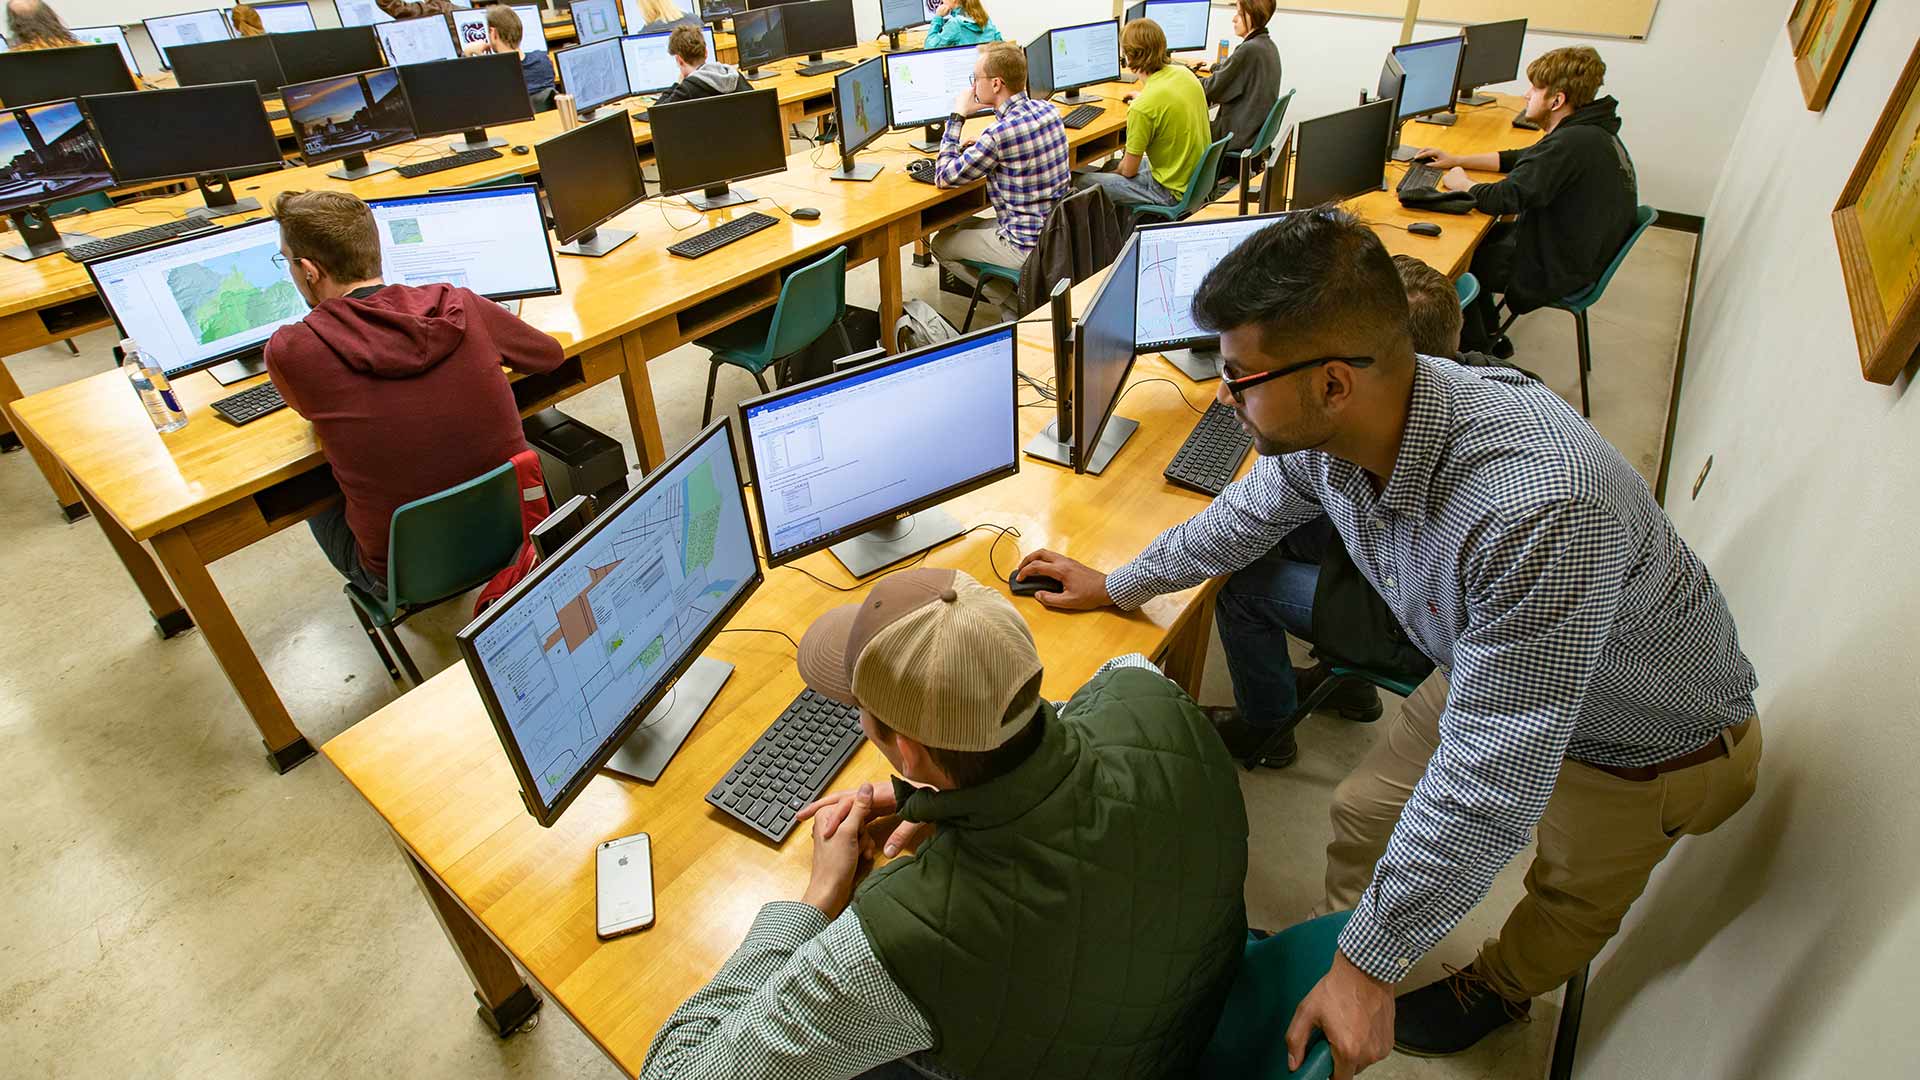 Students working on computers in a GIS lab classroom.